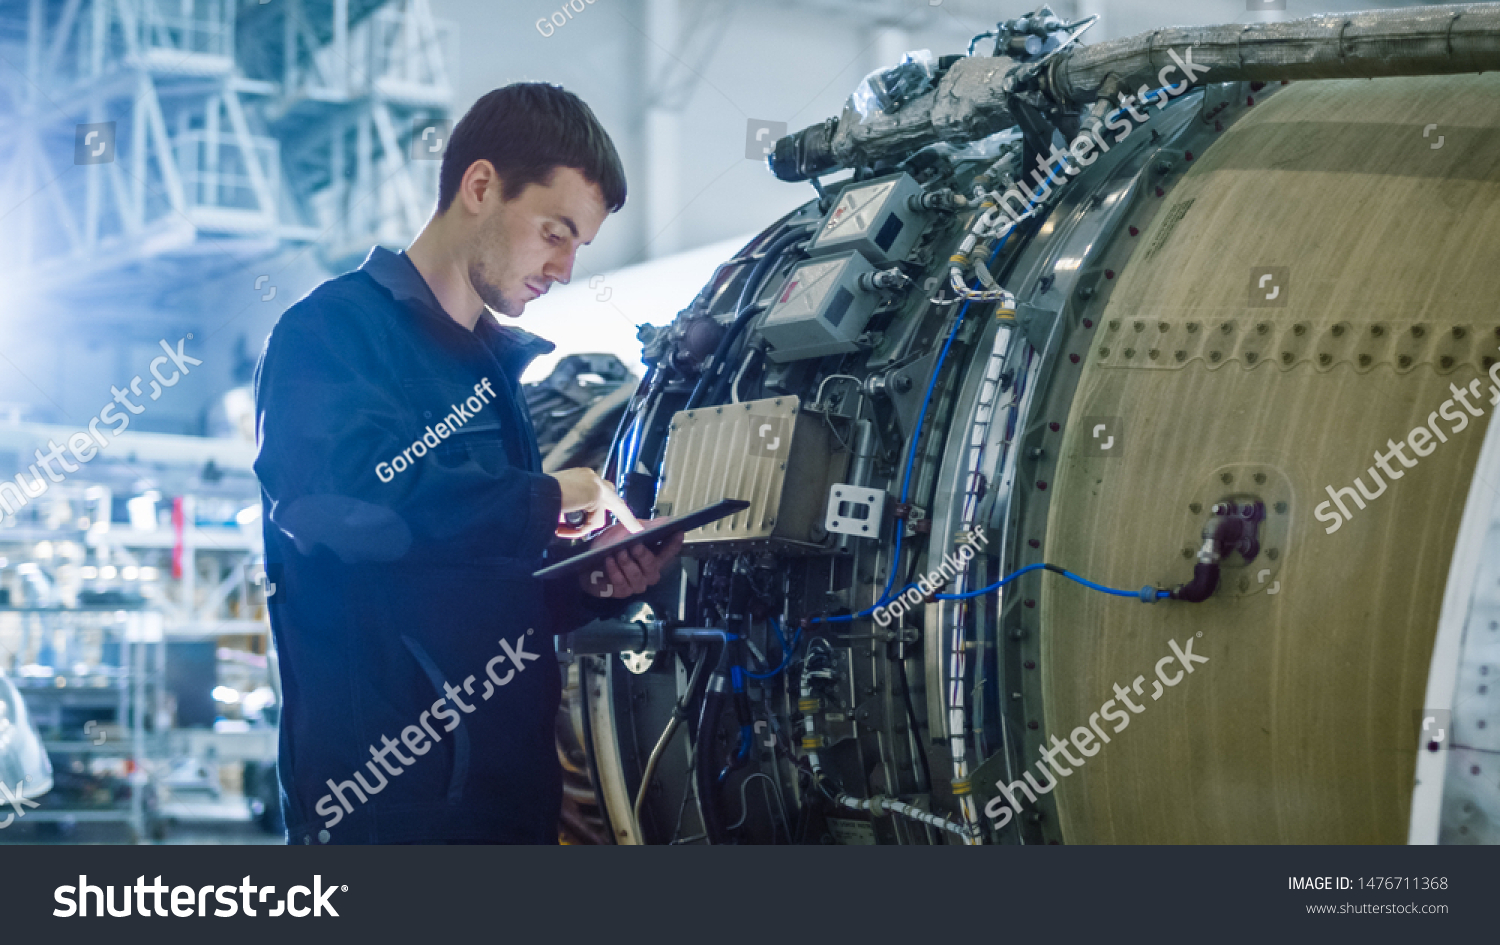 Aircraft Maintenance Mechanic Inspecting and Working on Airplane Jet Engine in Hangar #1476711368